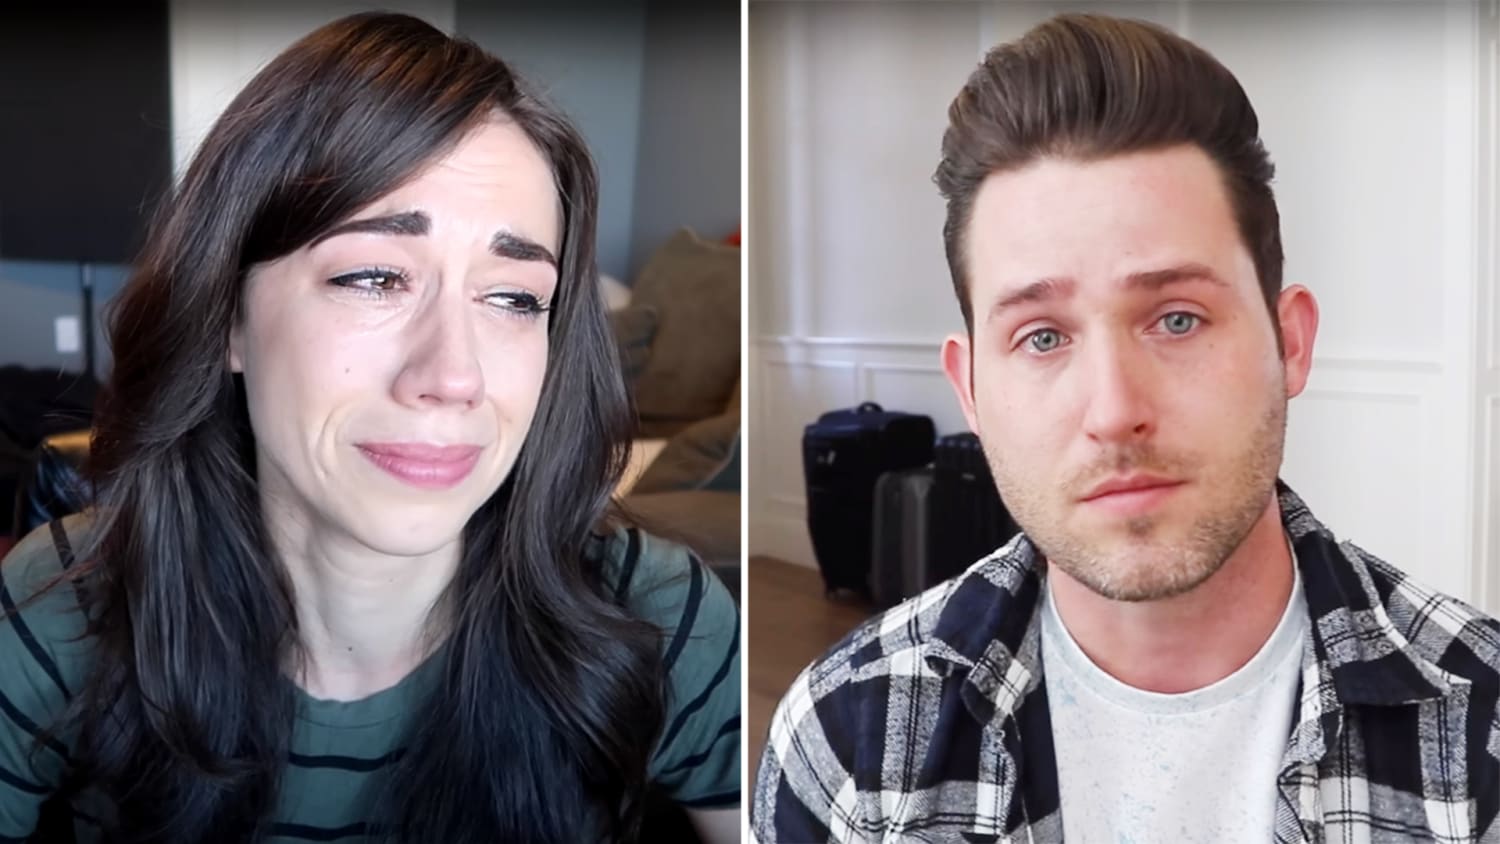 Colleen Ballinger Joshua David Evans YouTube couple to divorce, reveal perfect life hid ‘the really hard stuff’ - TODAY.com